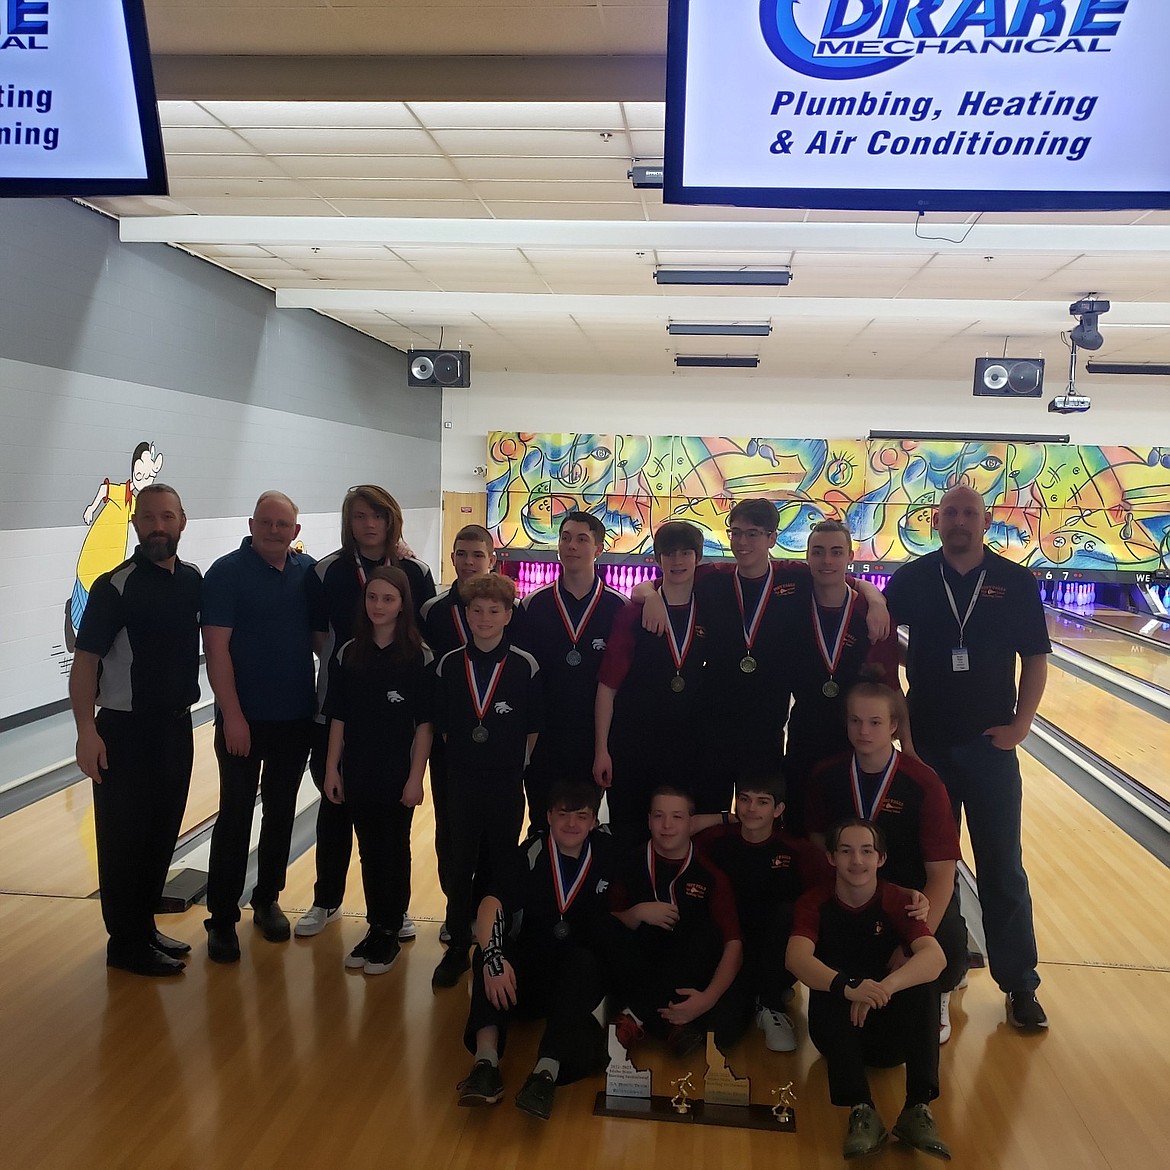 Courtesy photo
Post Falls boys placed first in 5A, and Lake City's boys were second in 5A at the recent state bowling championships in Garden City.
In the front row from left are Colin Borgaro, Alex Walker, Alex Higgins and Donald Shaw; middle row from left, Rosy Gallegos, Byron Hammett and Bladen Huffaker; and back row from left, Josh Loper Sr. (coach), Ron Jacobson (coach), Gezus LaSarte, Tyler Clarke (first place in boys singles), Josh Loper Jr., Eric Campbell, Quinlan Campenella, Jayson Austin and Bryan Rider (coach).